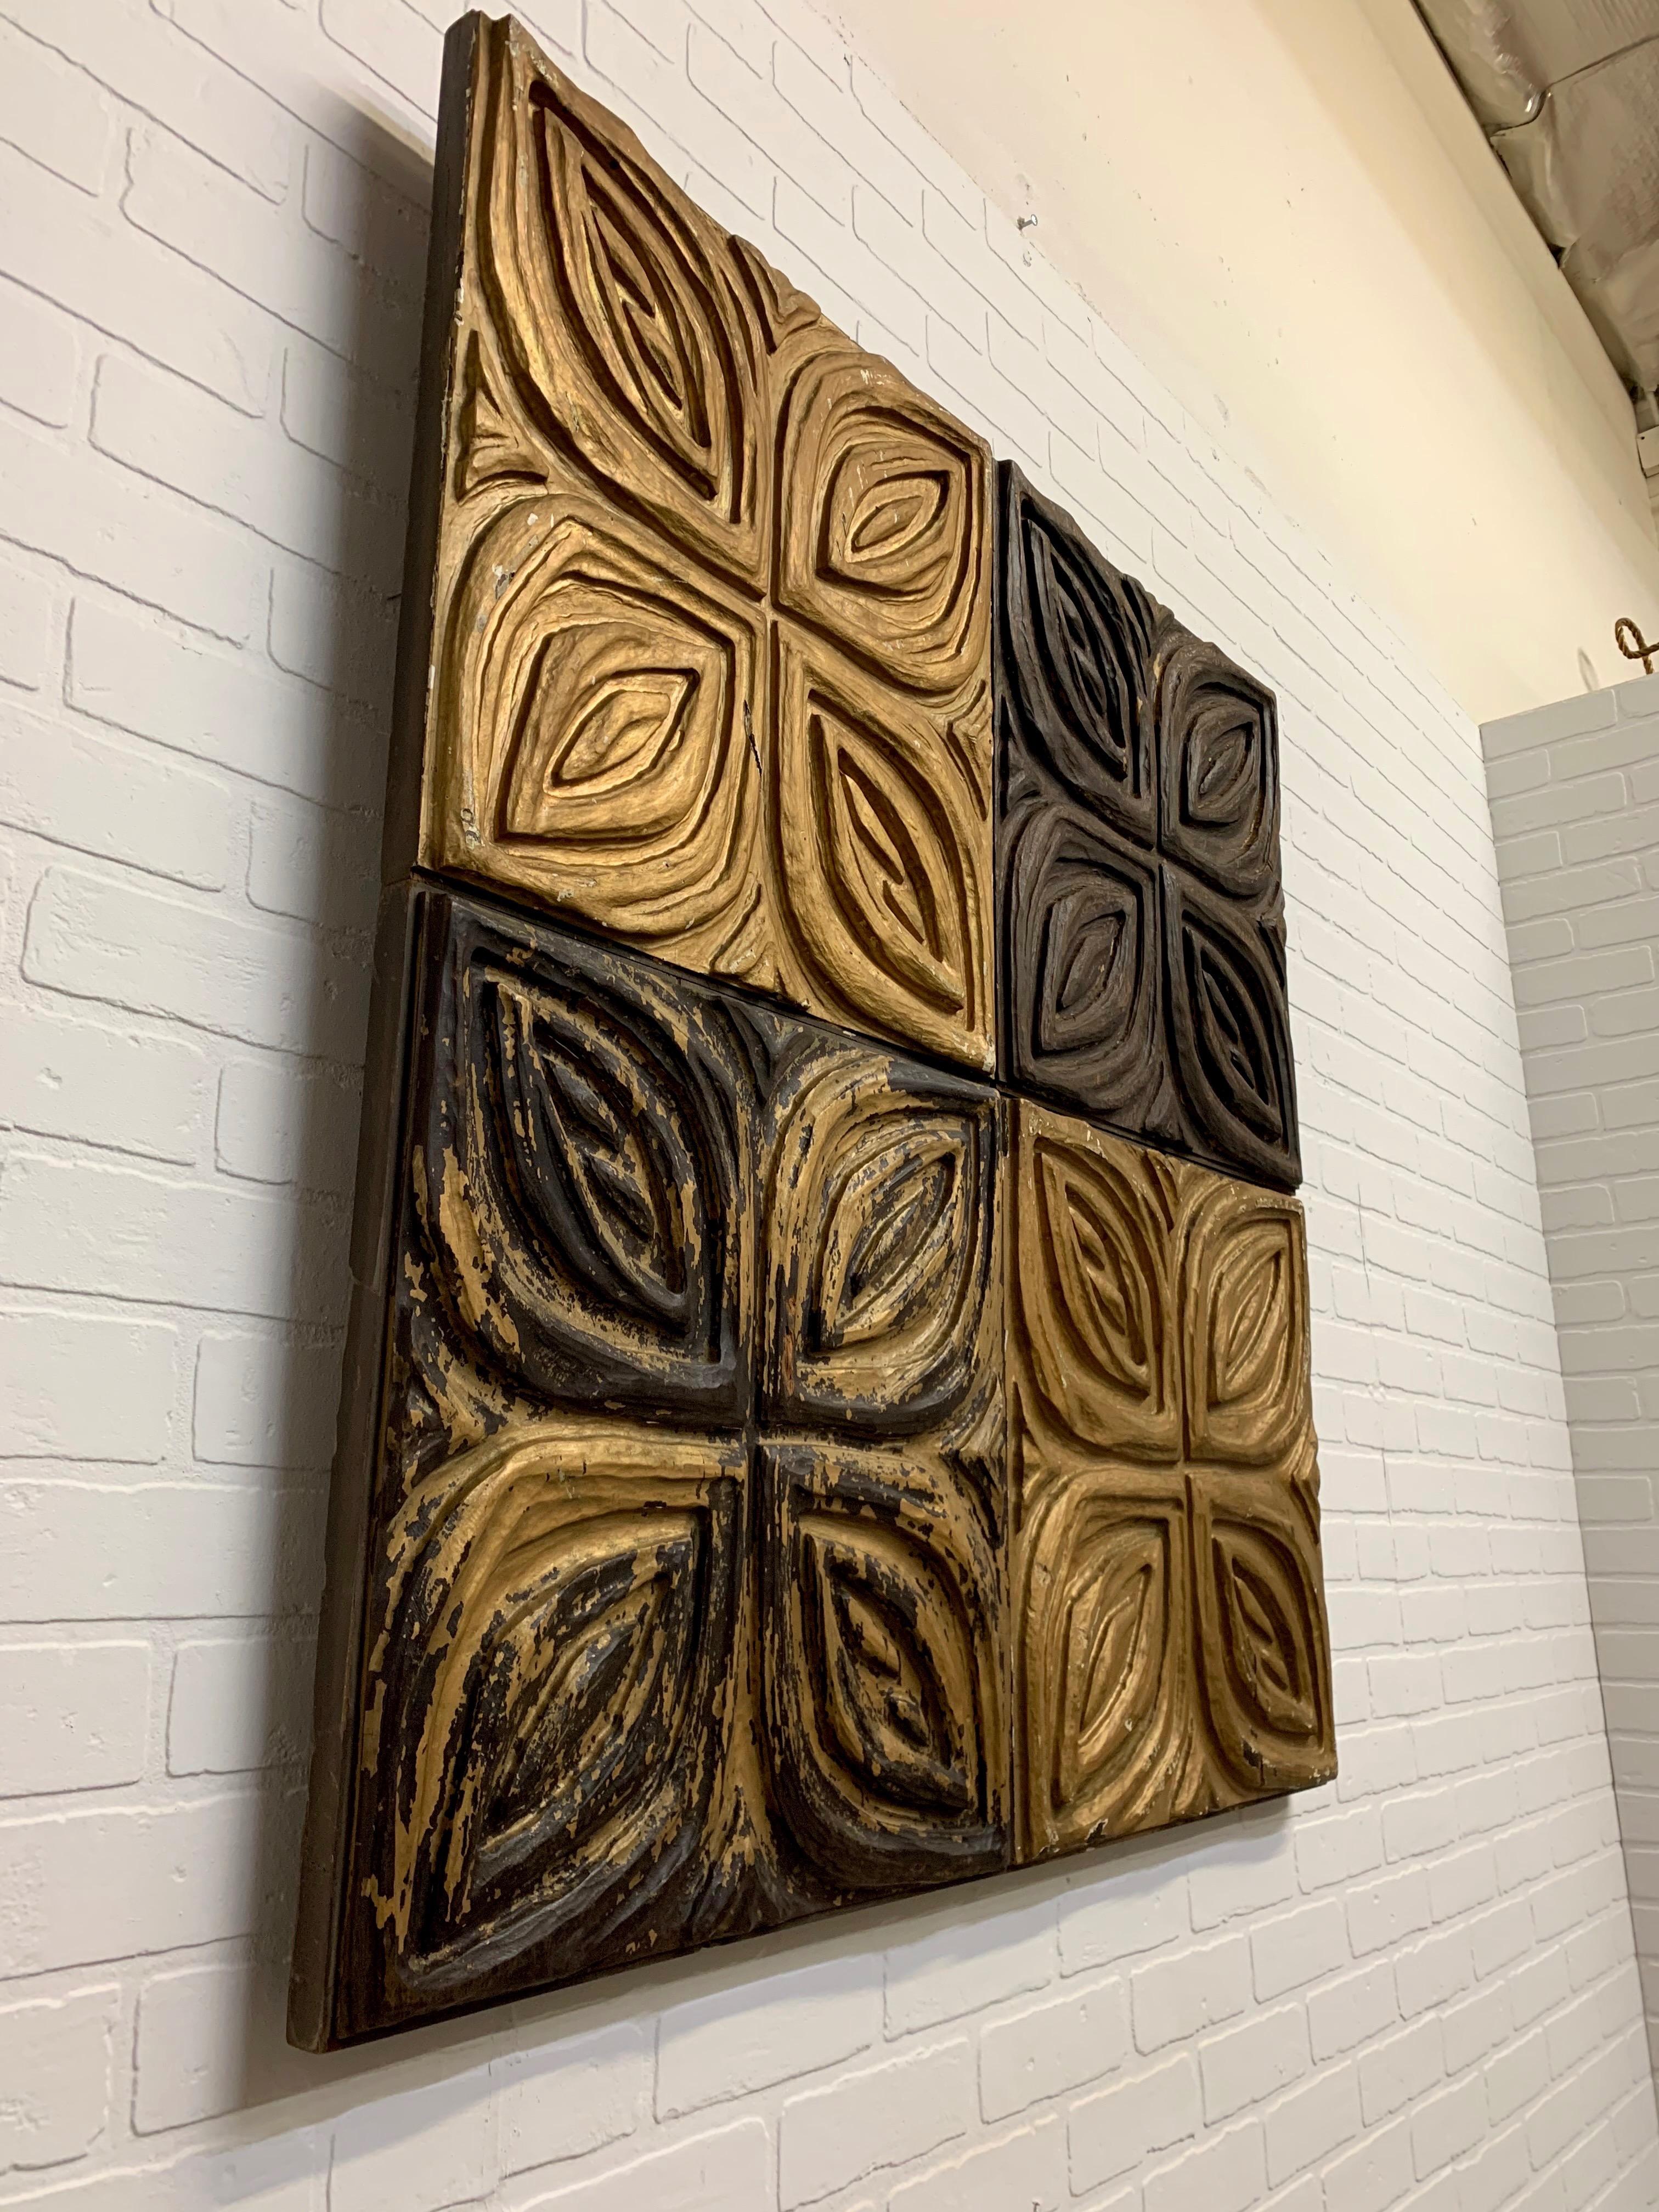 Carved redwood wall panels or sculptures by Panelcarve. Four separate panels attached to one piece of plywood. Attributed to Sheryl Brody or Evelyn Ackerman.